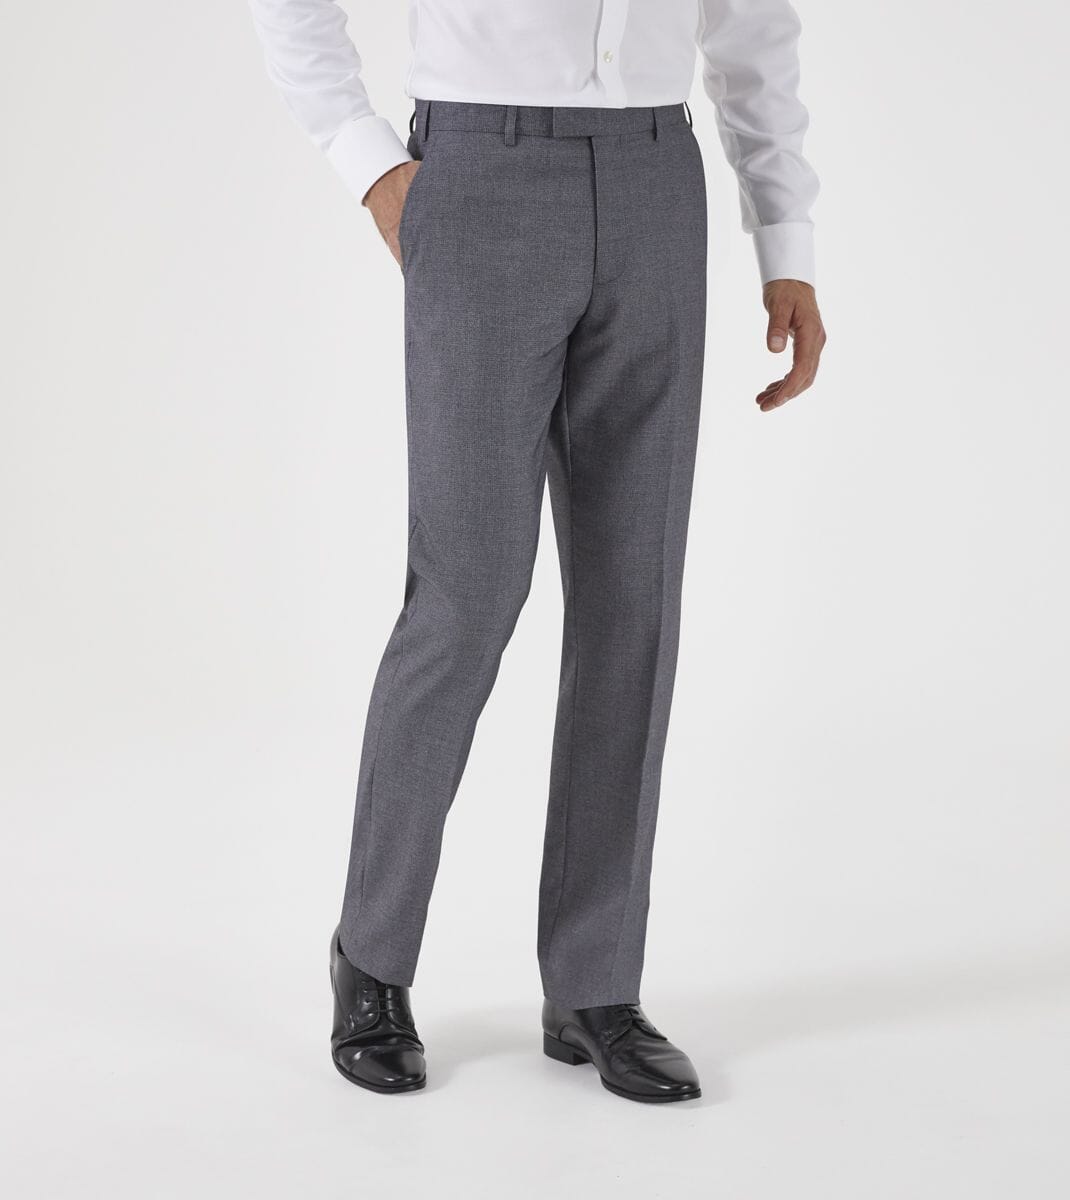 Harcourt Silver Trousers - Trousers - 28R - THREADPEPPER